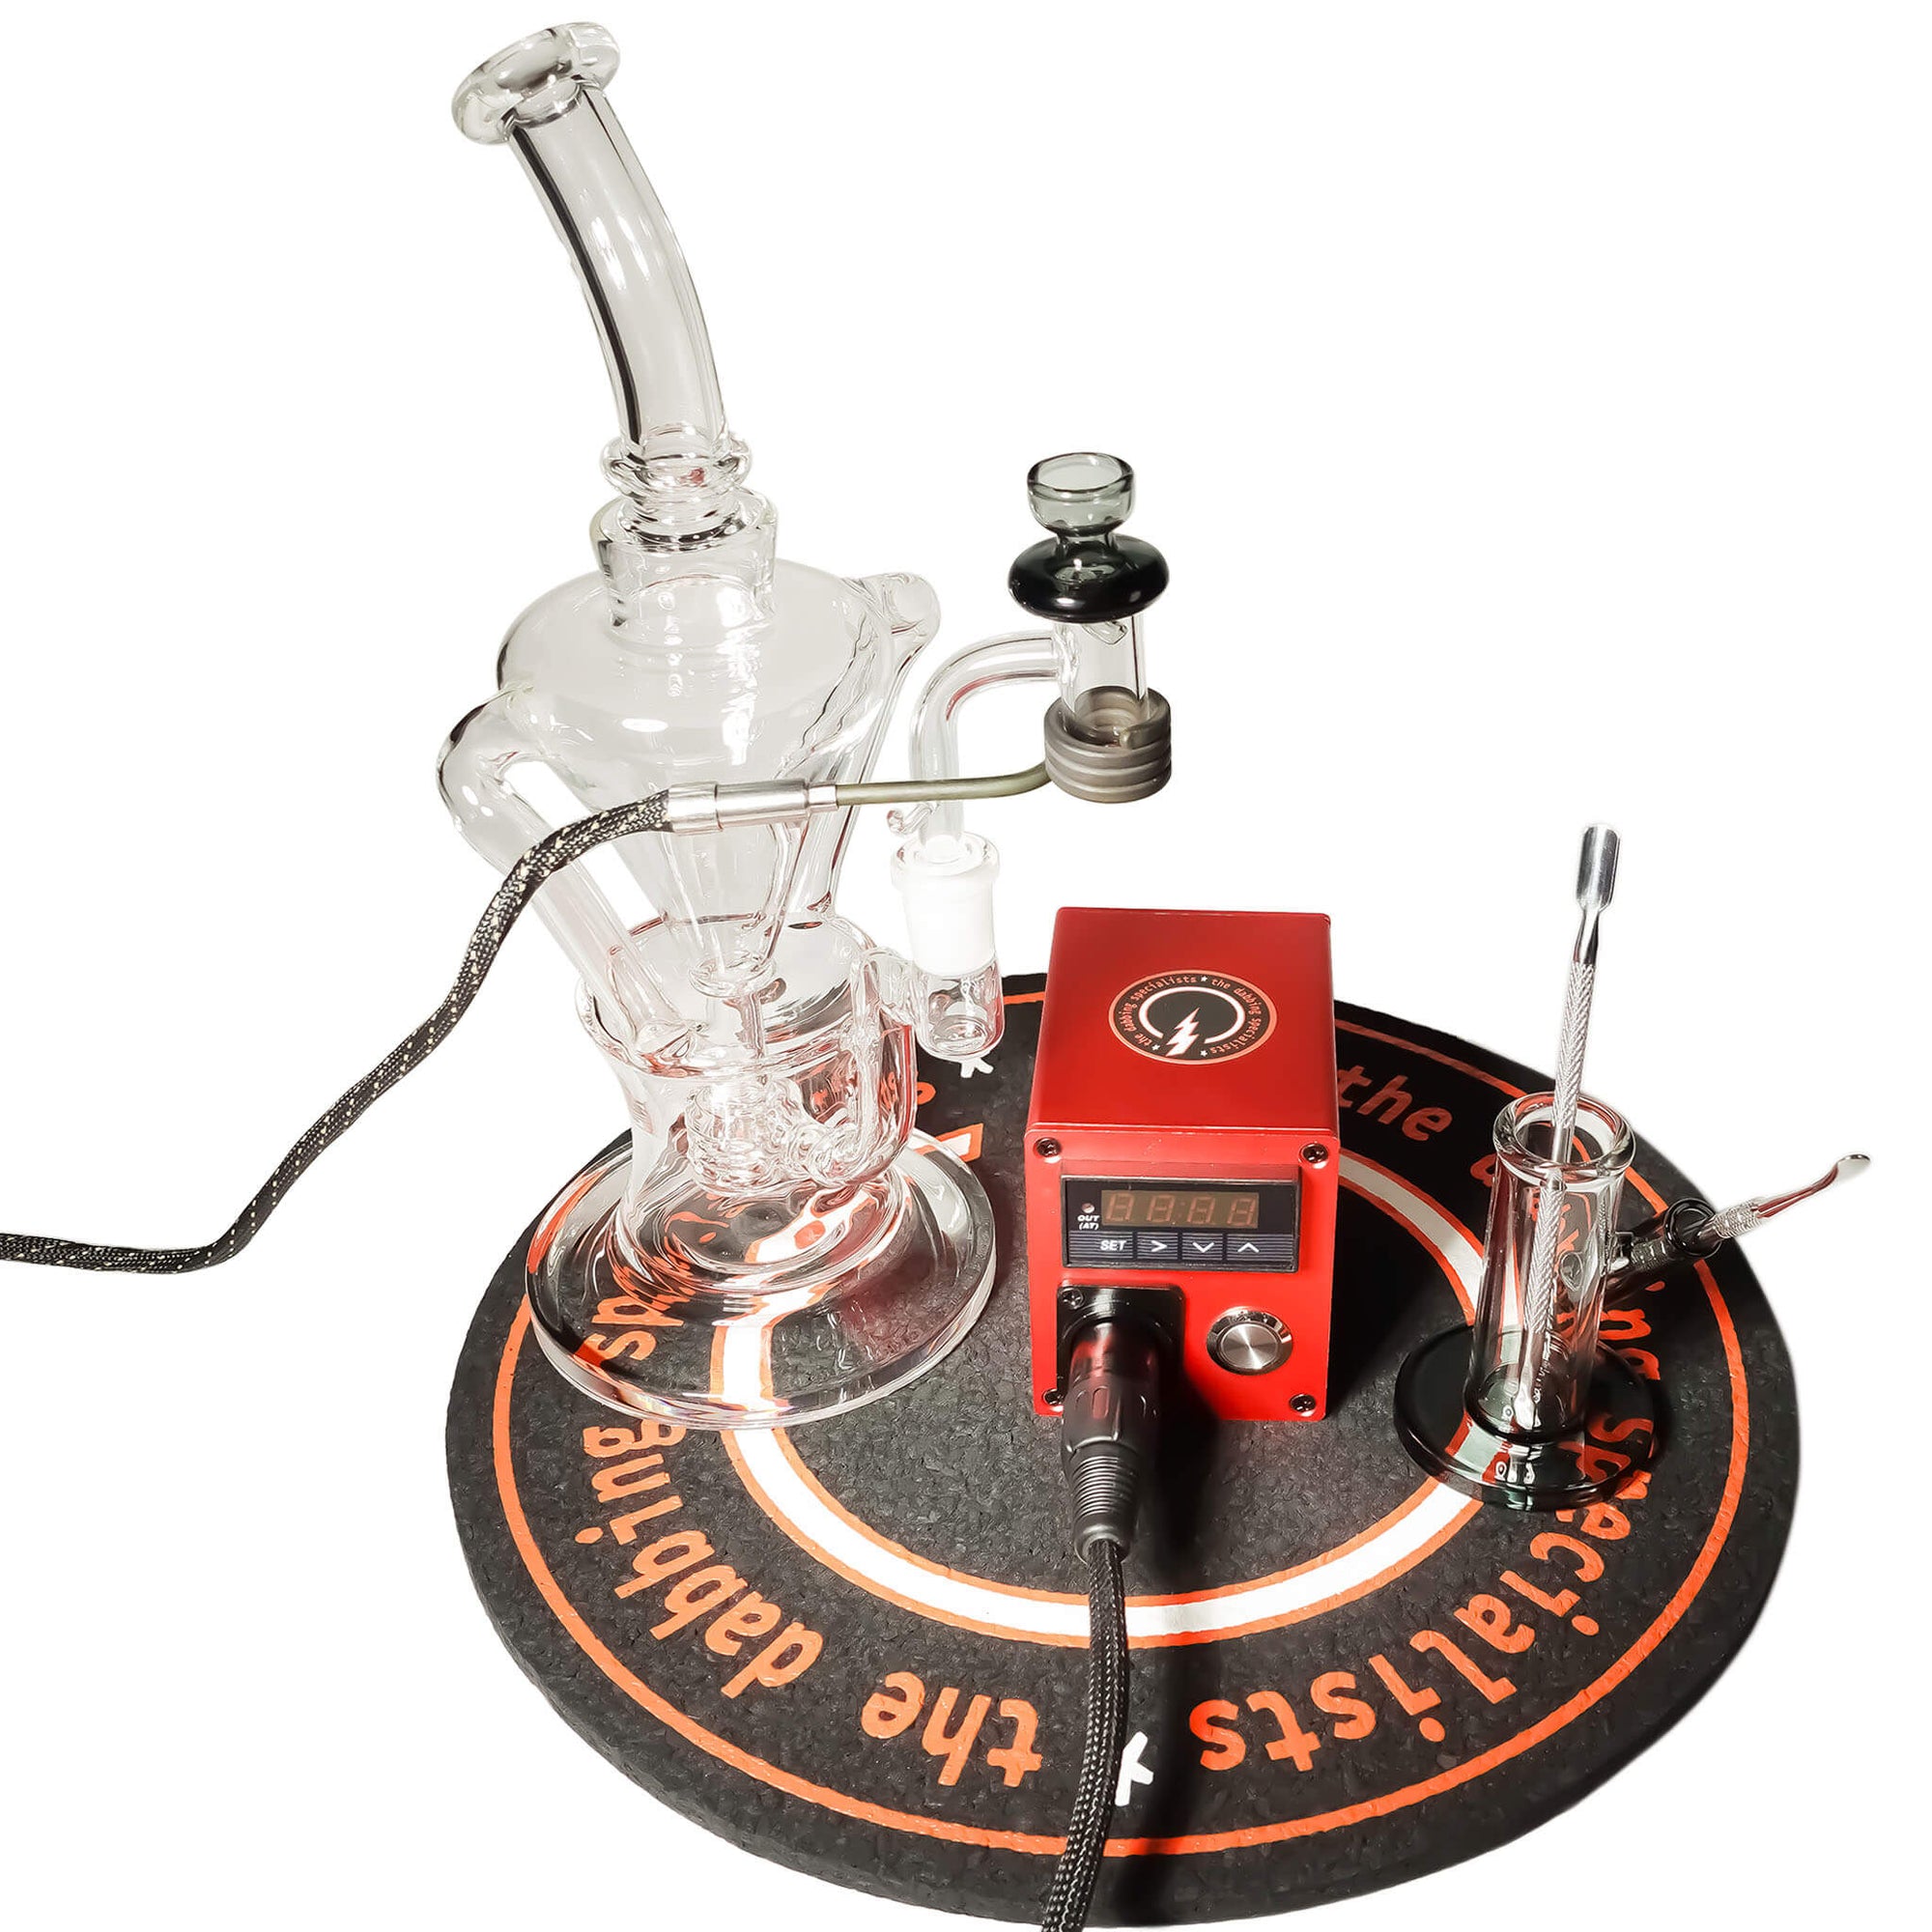 Futurus 16mm E-Banger Deluxe Enail Kit | Red Kit View | the dabbing specialists